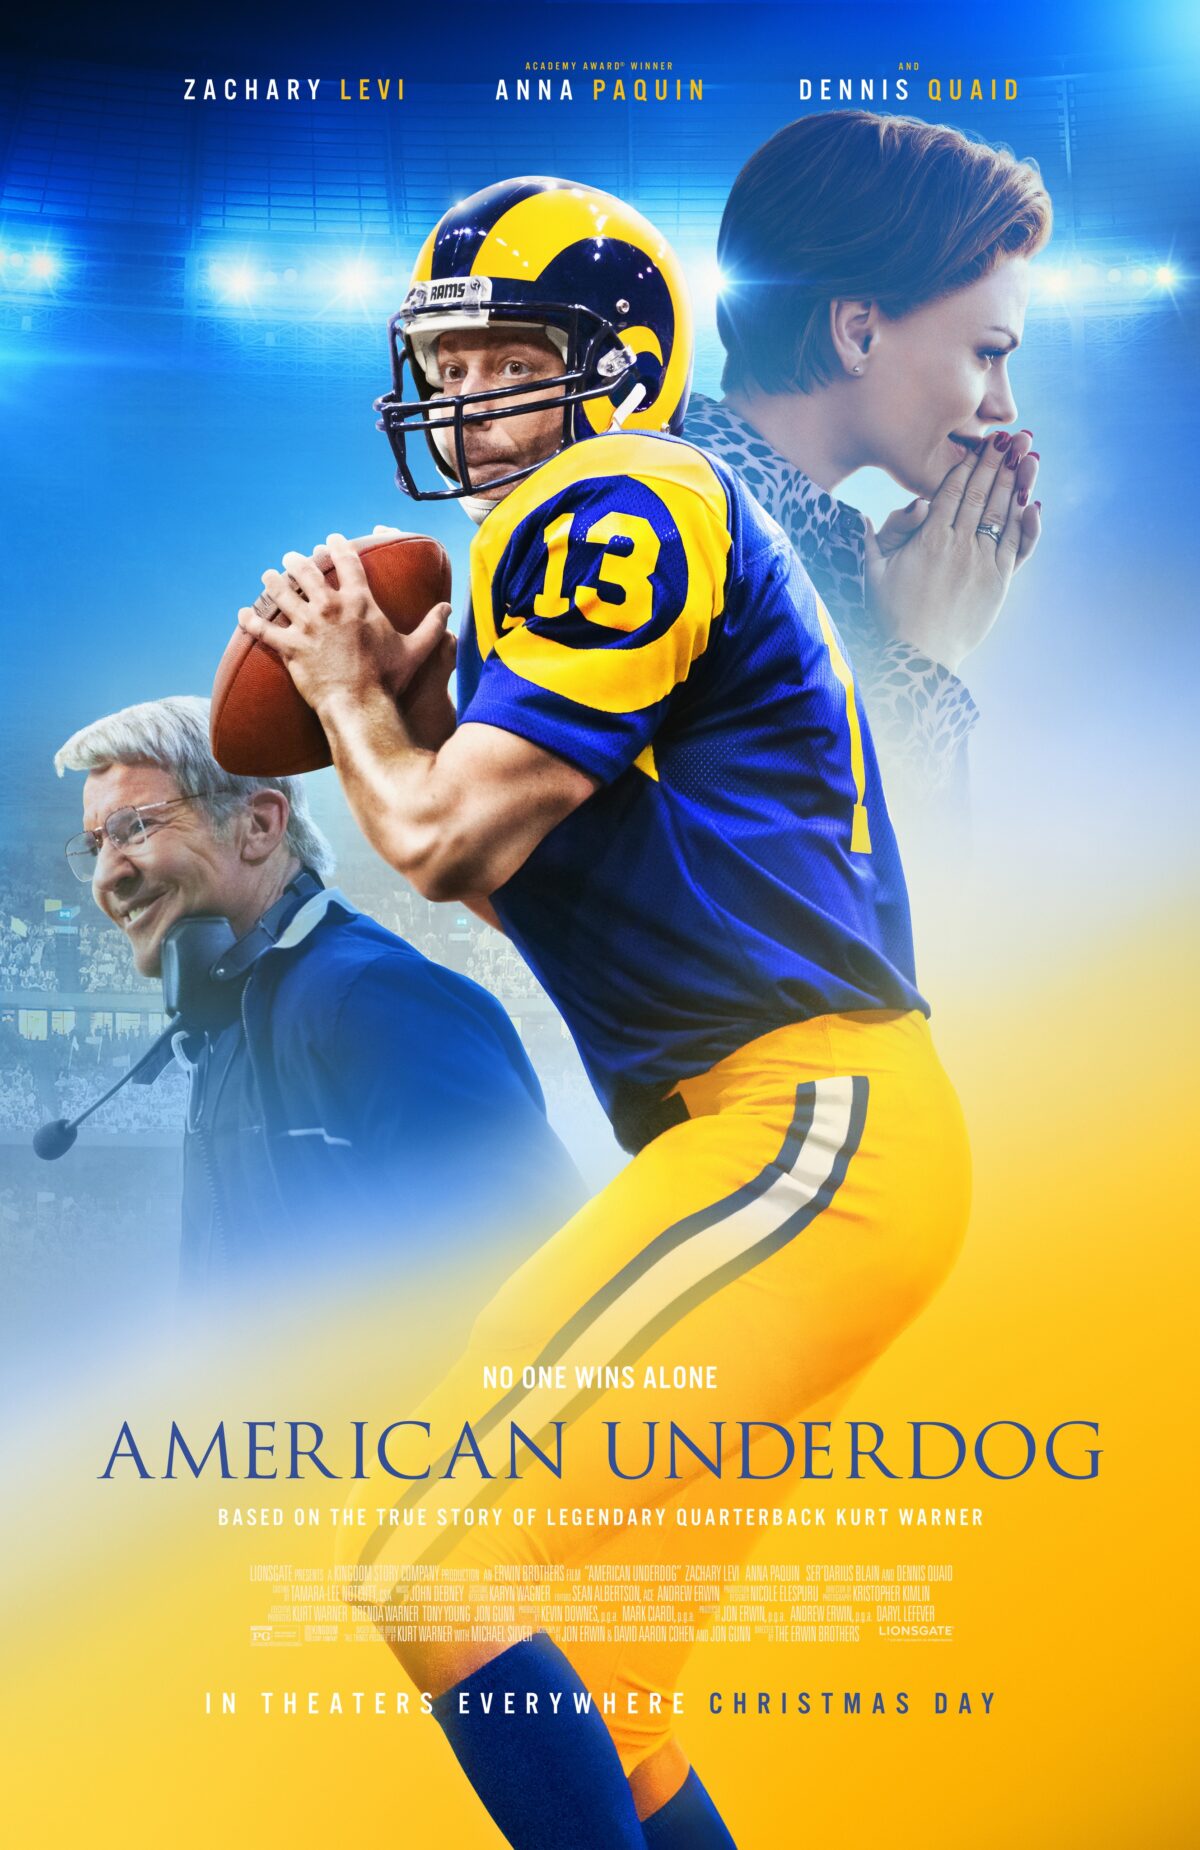 Movie poster for "American Underdog"